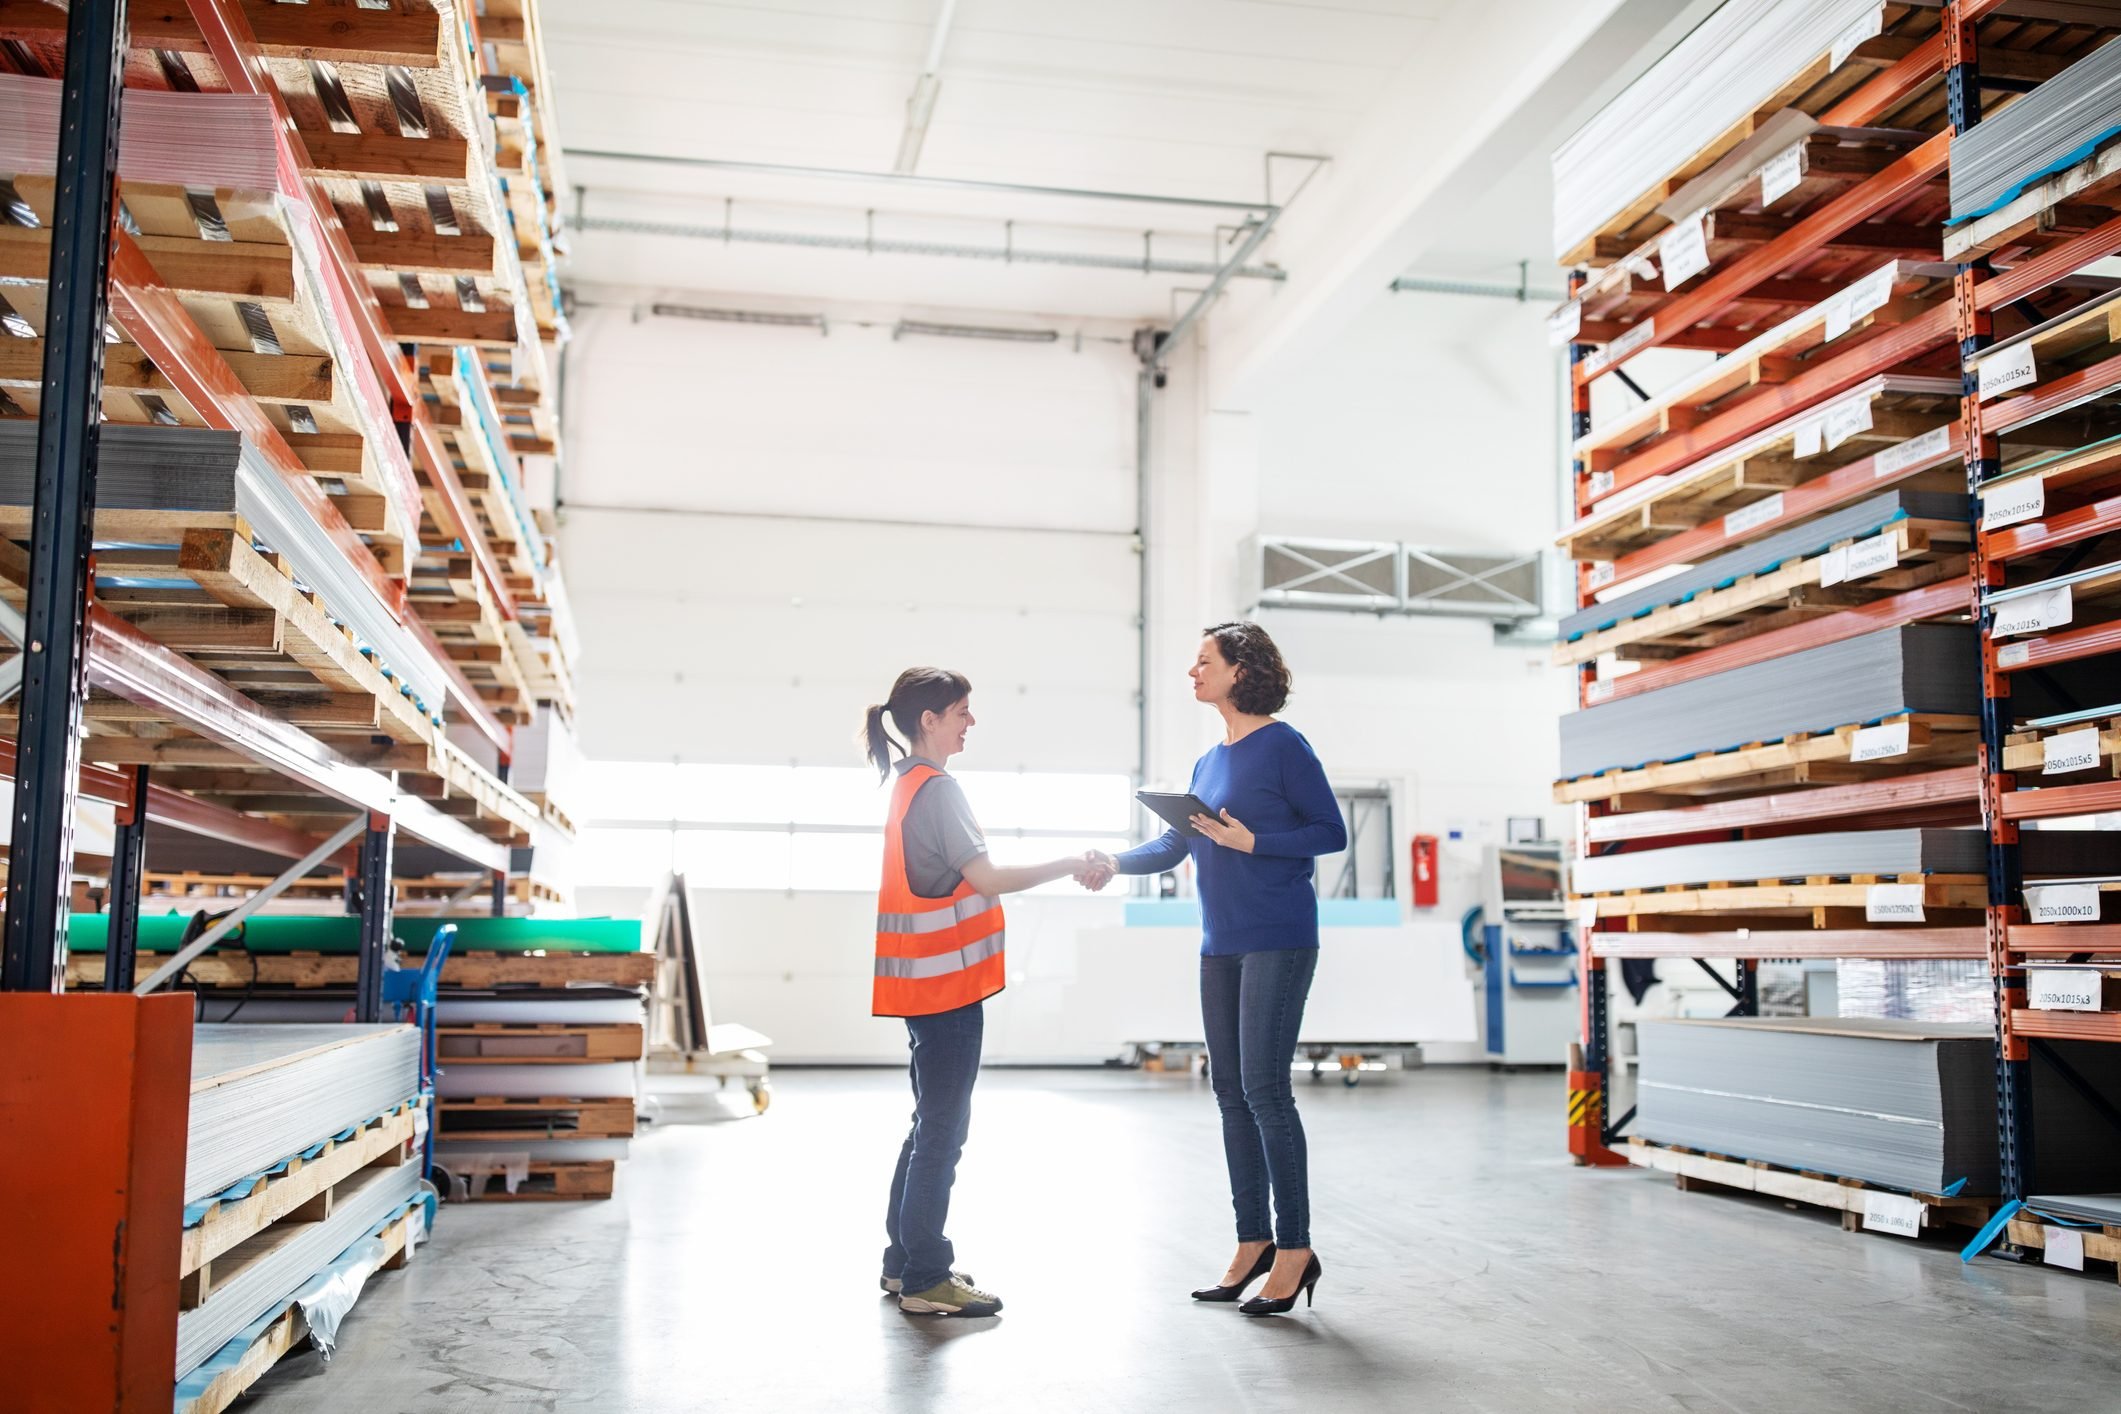 Businesswoman shaking hands with worker in large warehouse. Manager and worker handshake in storehouse